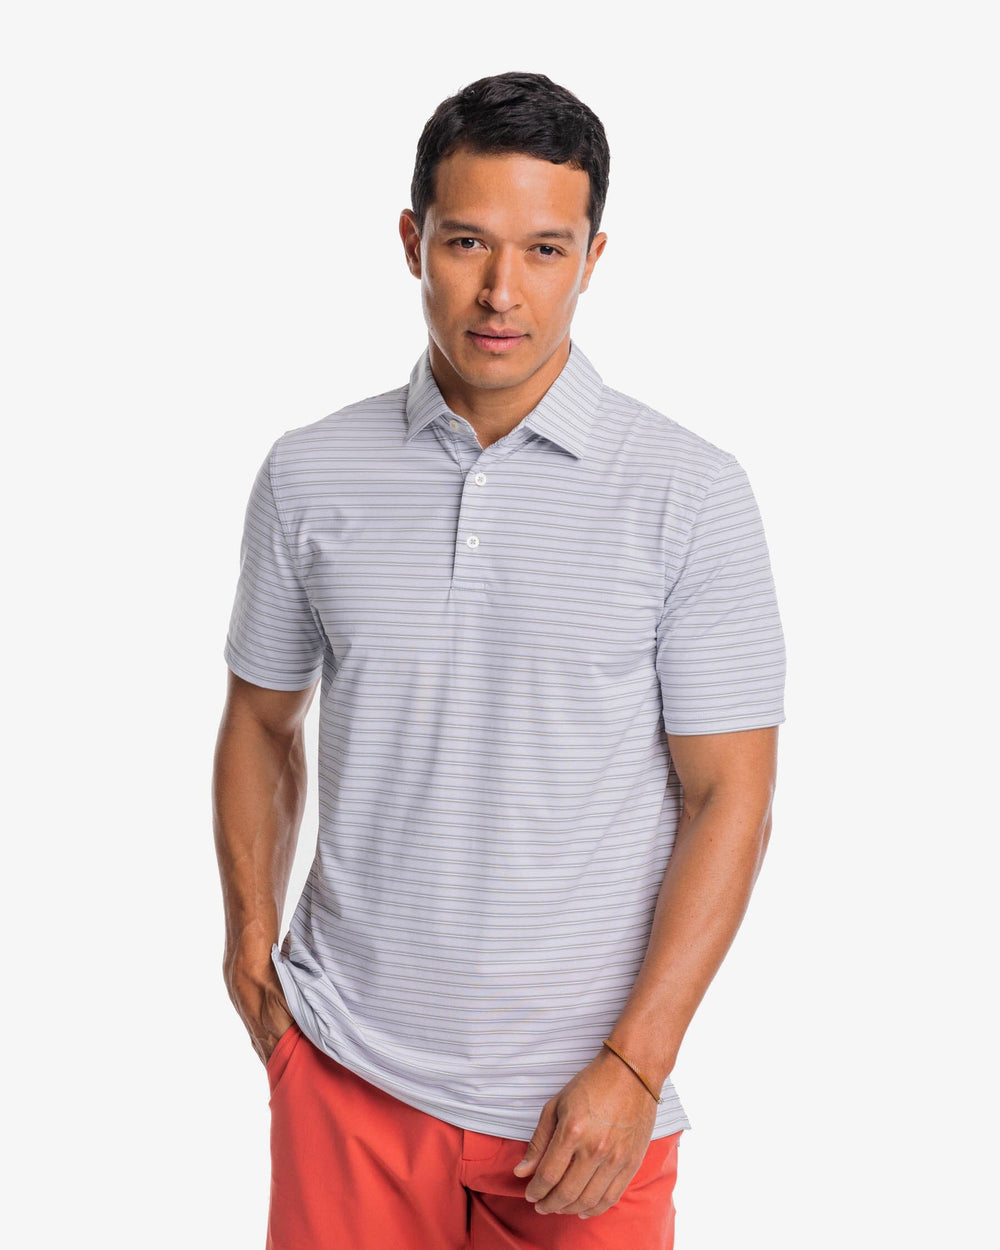 The front view of the Southern Tide Brrreeze Crawford Stripe Performance Polo Shirt by Southern Tide - Slate Grey